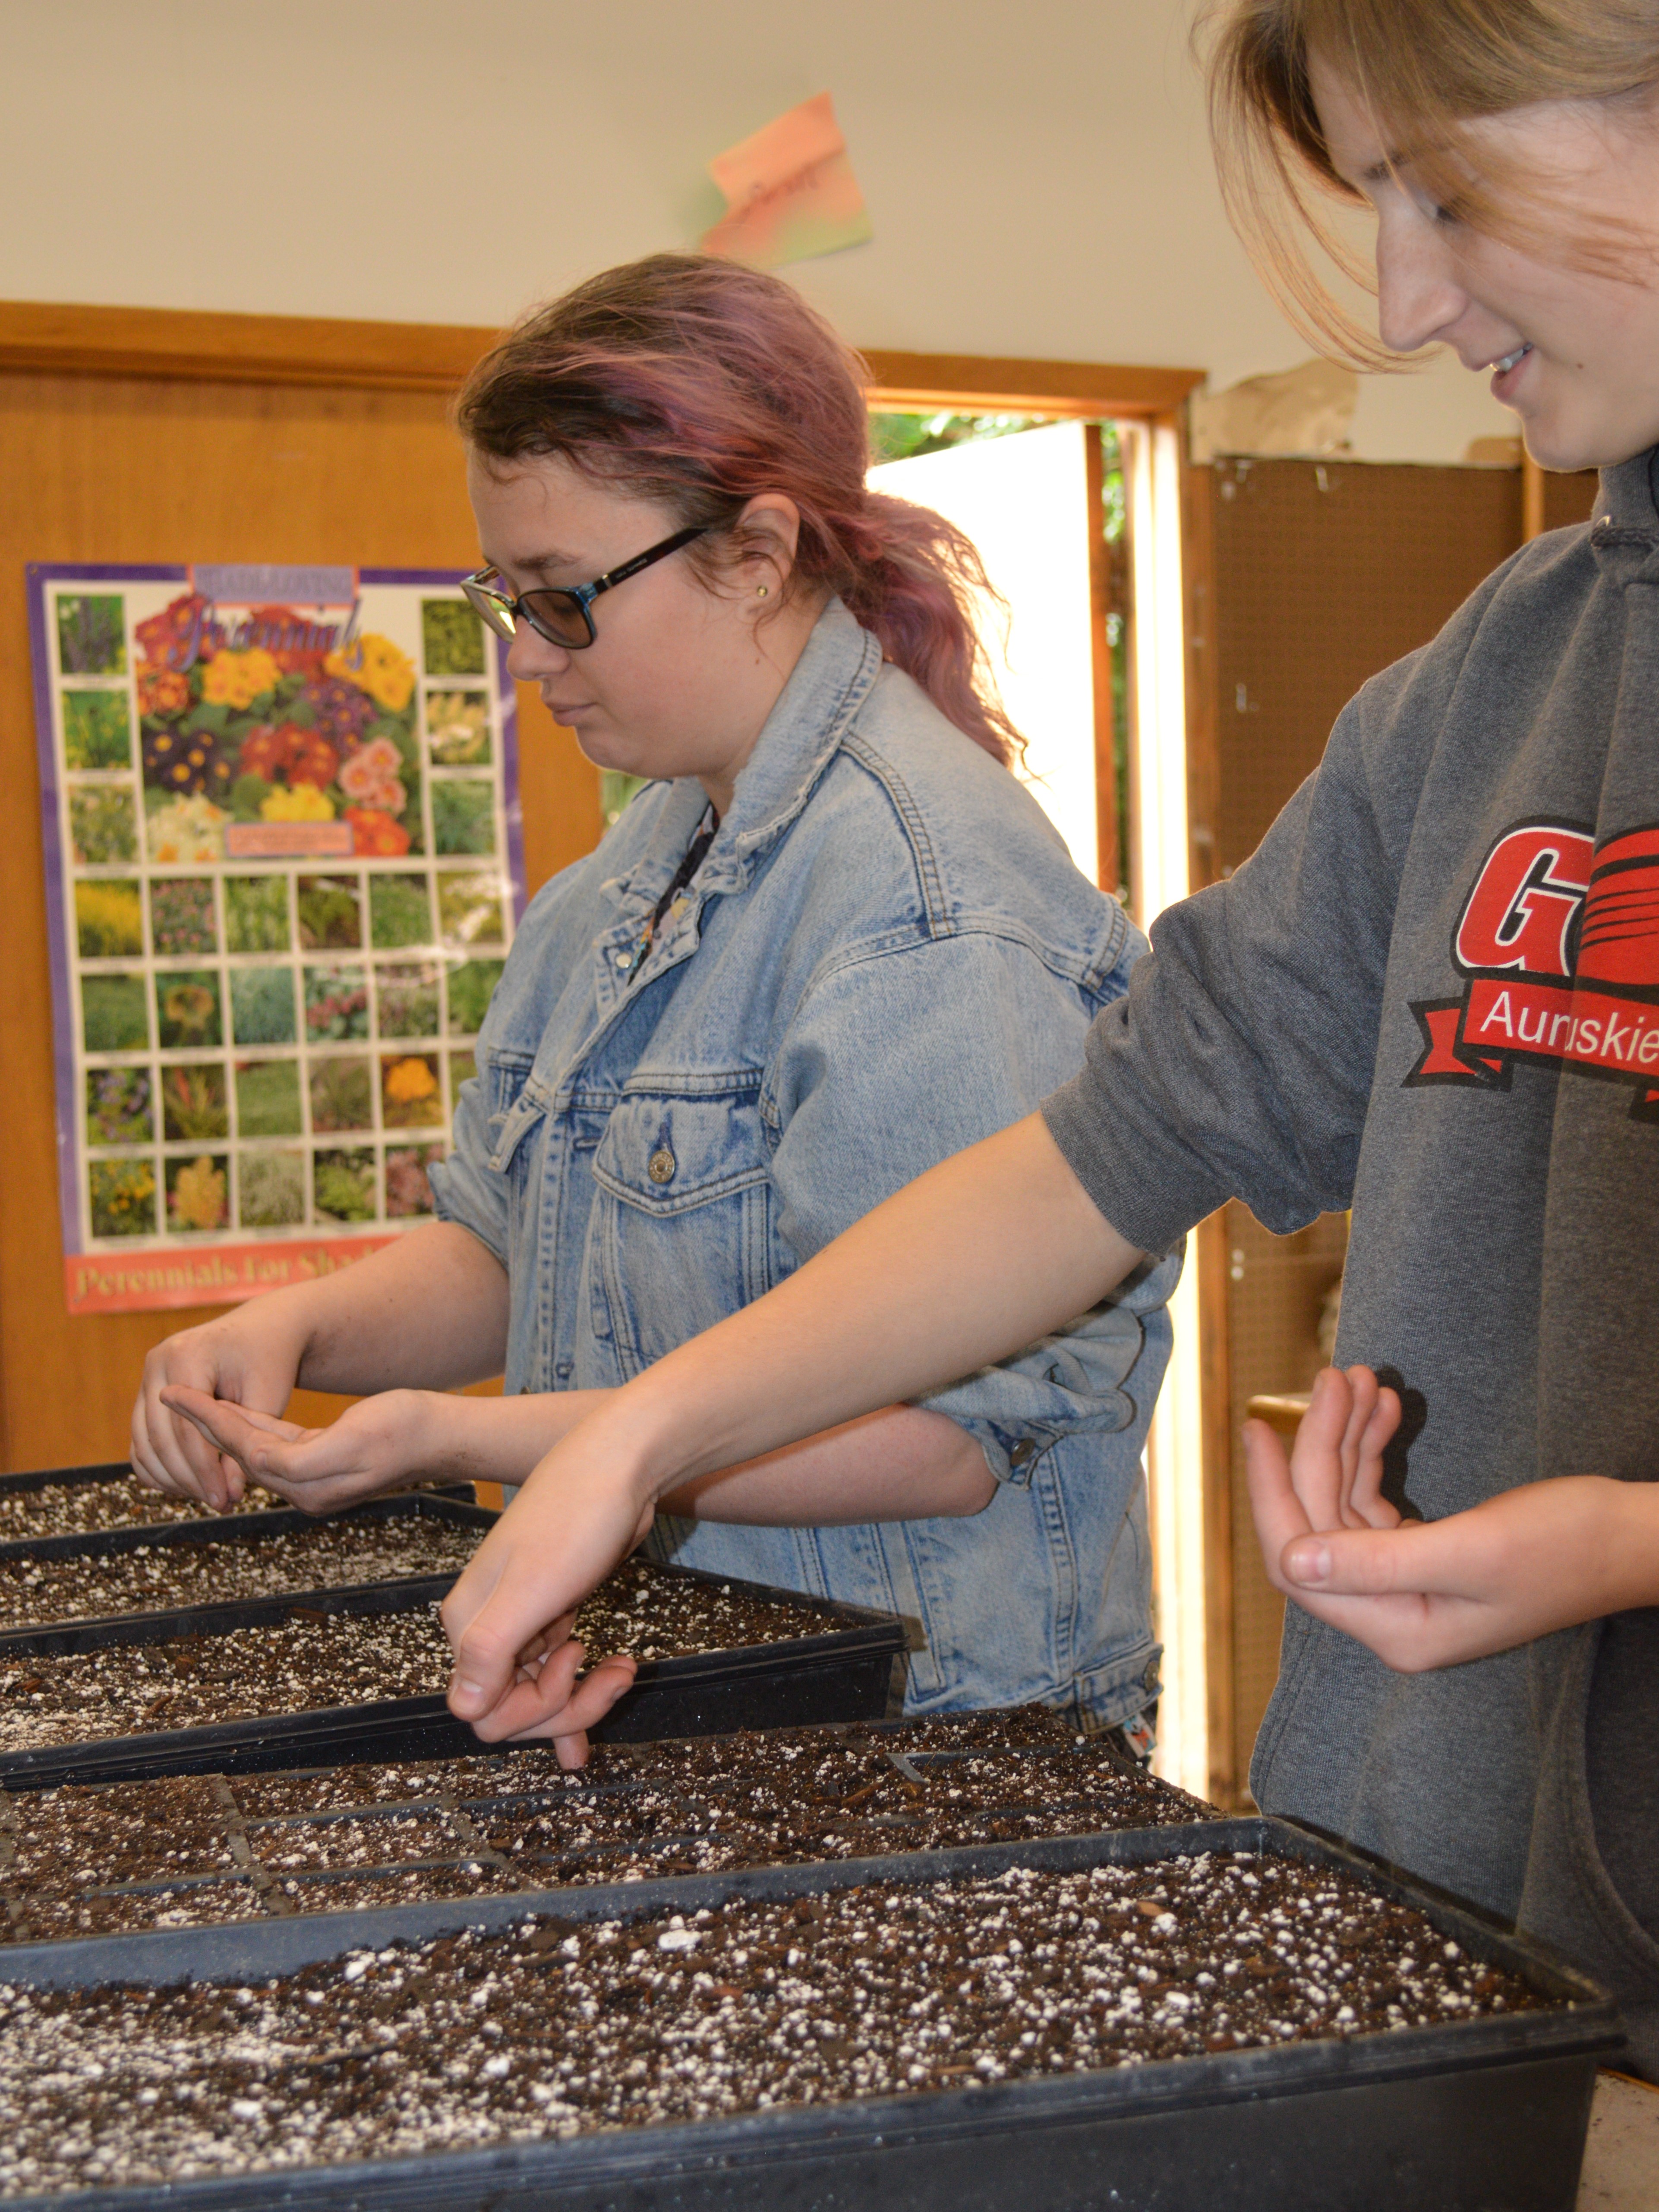 Horticulture Club members left, Hannah Friend of Camp Hill, Pennsylvania, and Rebecca Saddler of Aurora, plant seeds at the NCTA greenhouse this winter.  The club’s annual plant sale is Saturday and May 1.  (Photo by Kelly Gordon, NCTA student)